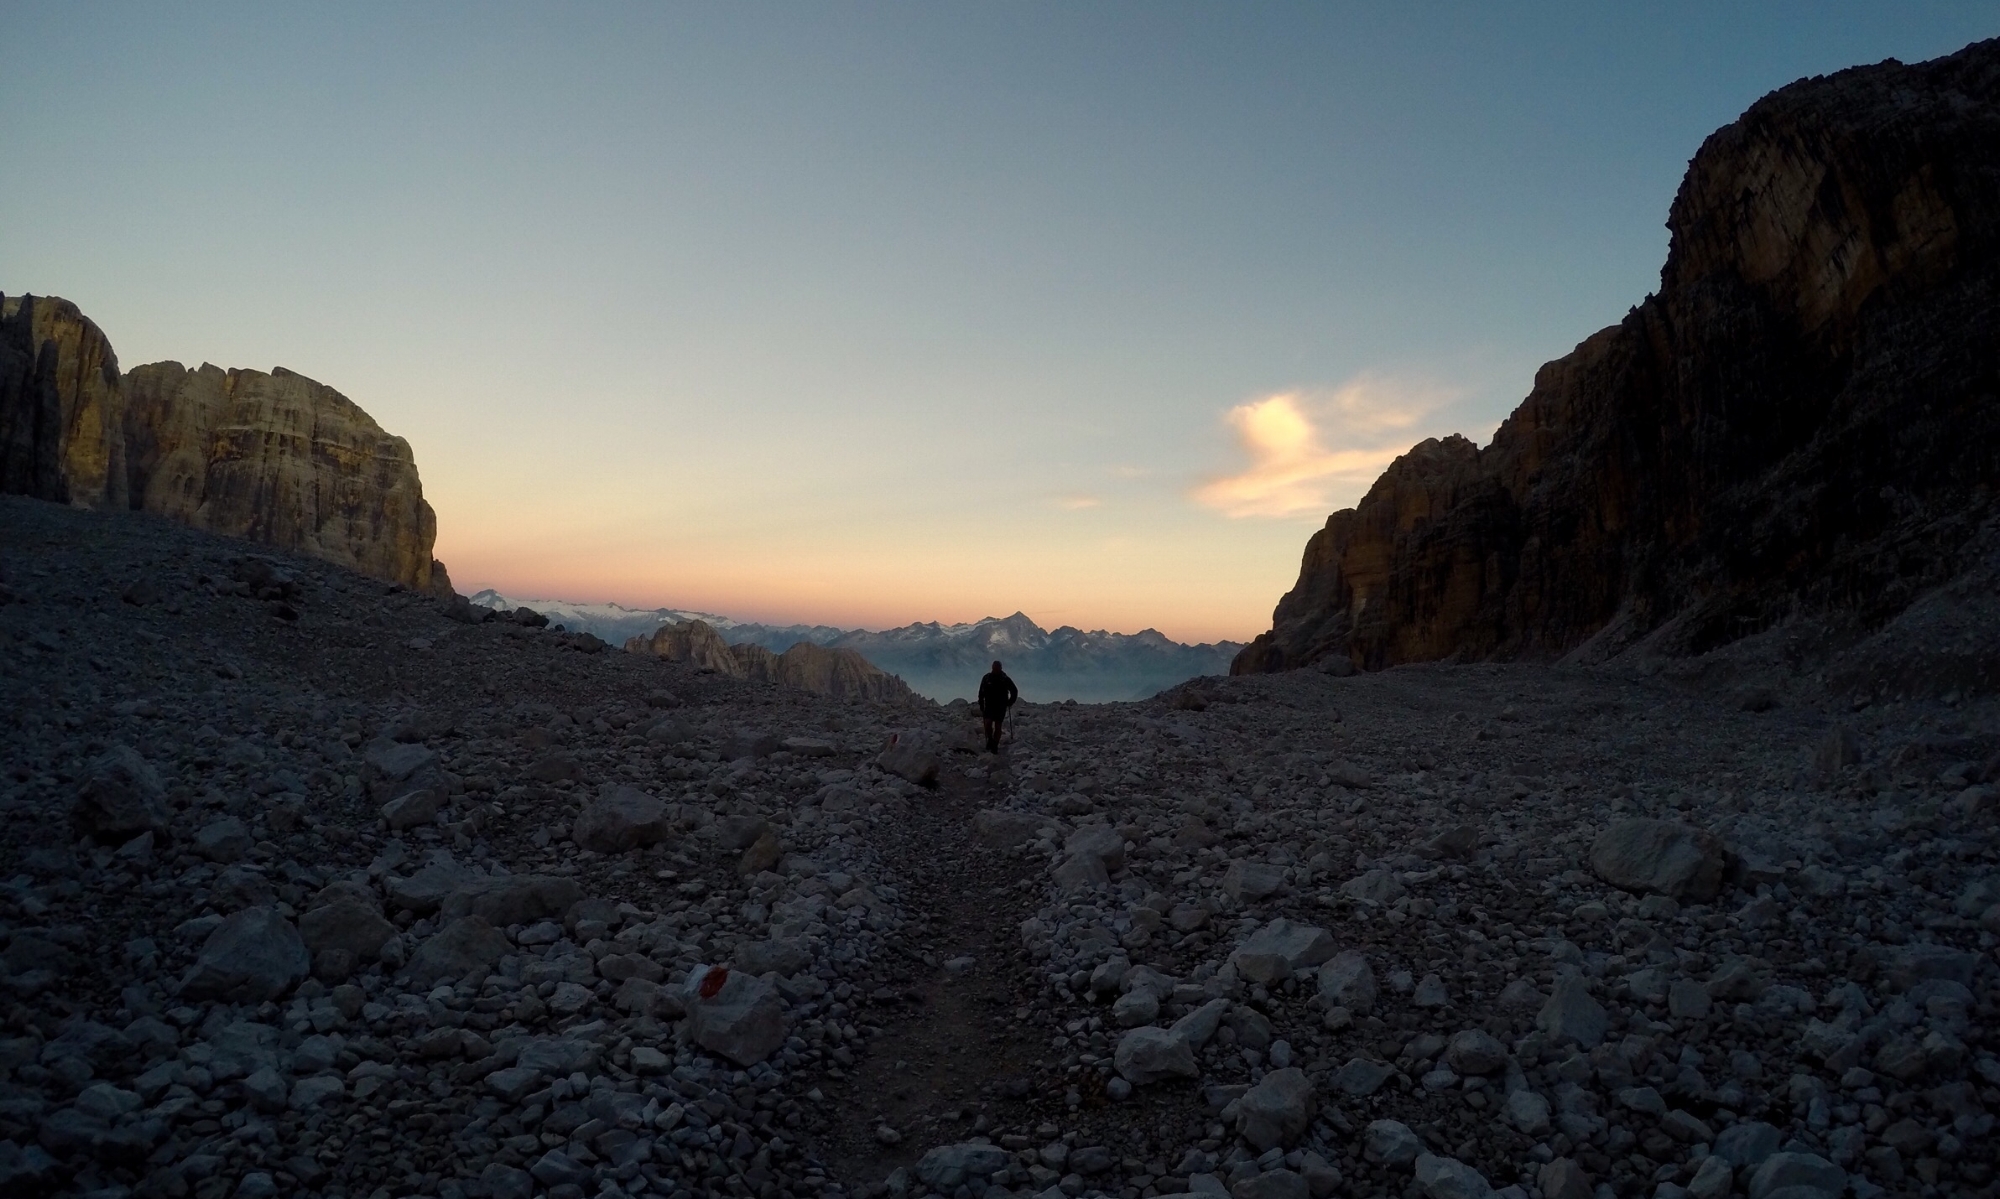 Young man walks off into the distance in the Brenta Dolomites at sunset